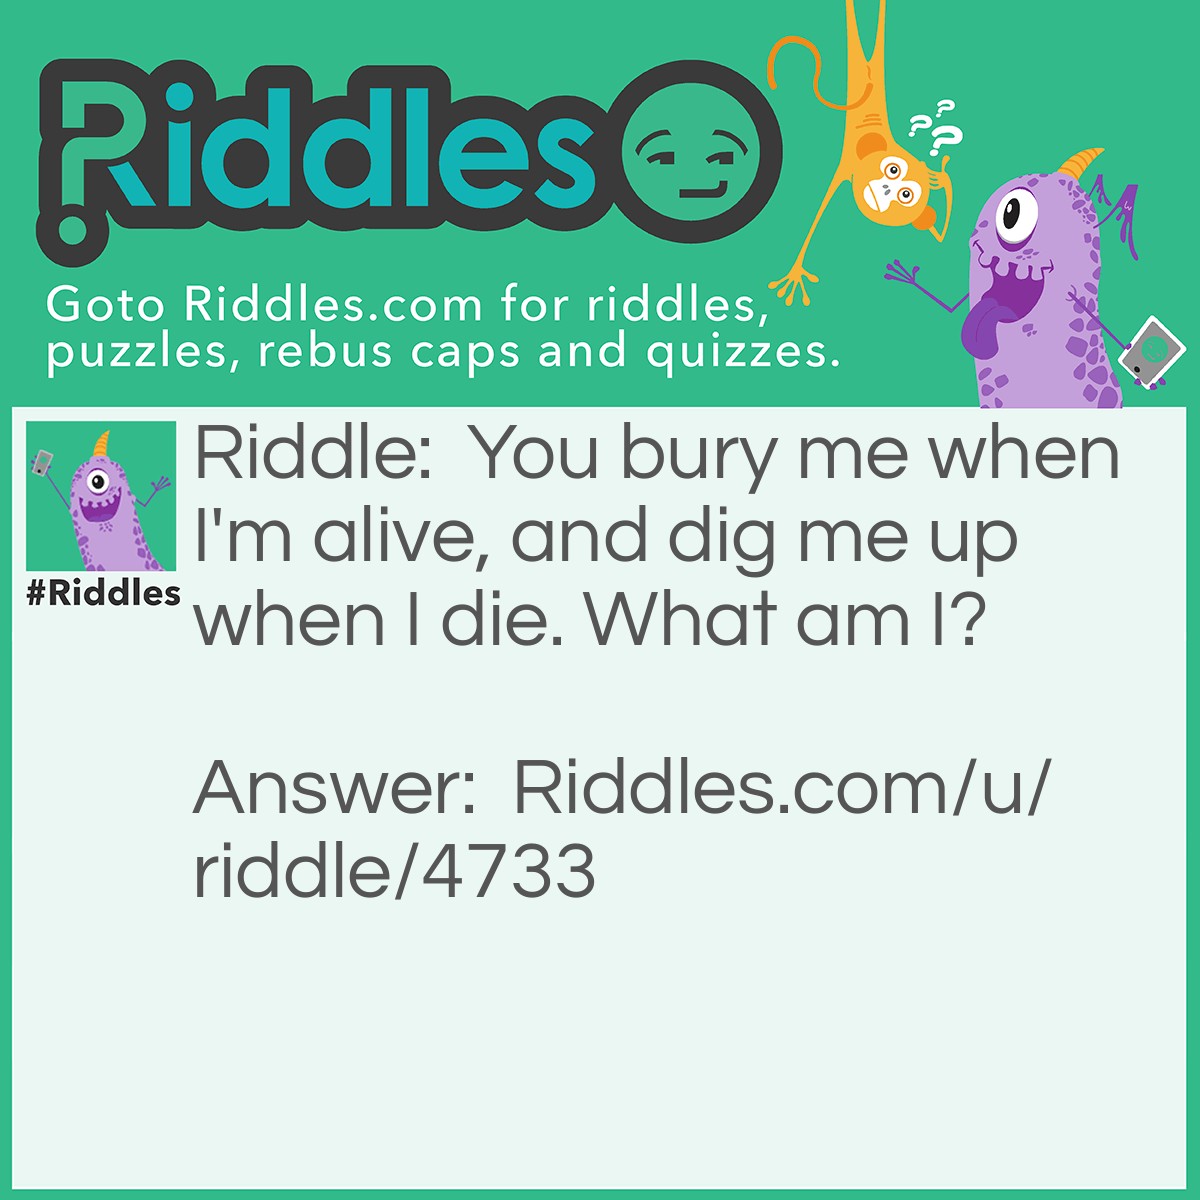 Riddle: You bury me when I'm alive, and dig me up when I die. What am I? Answer: A plant.